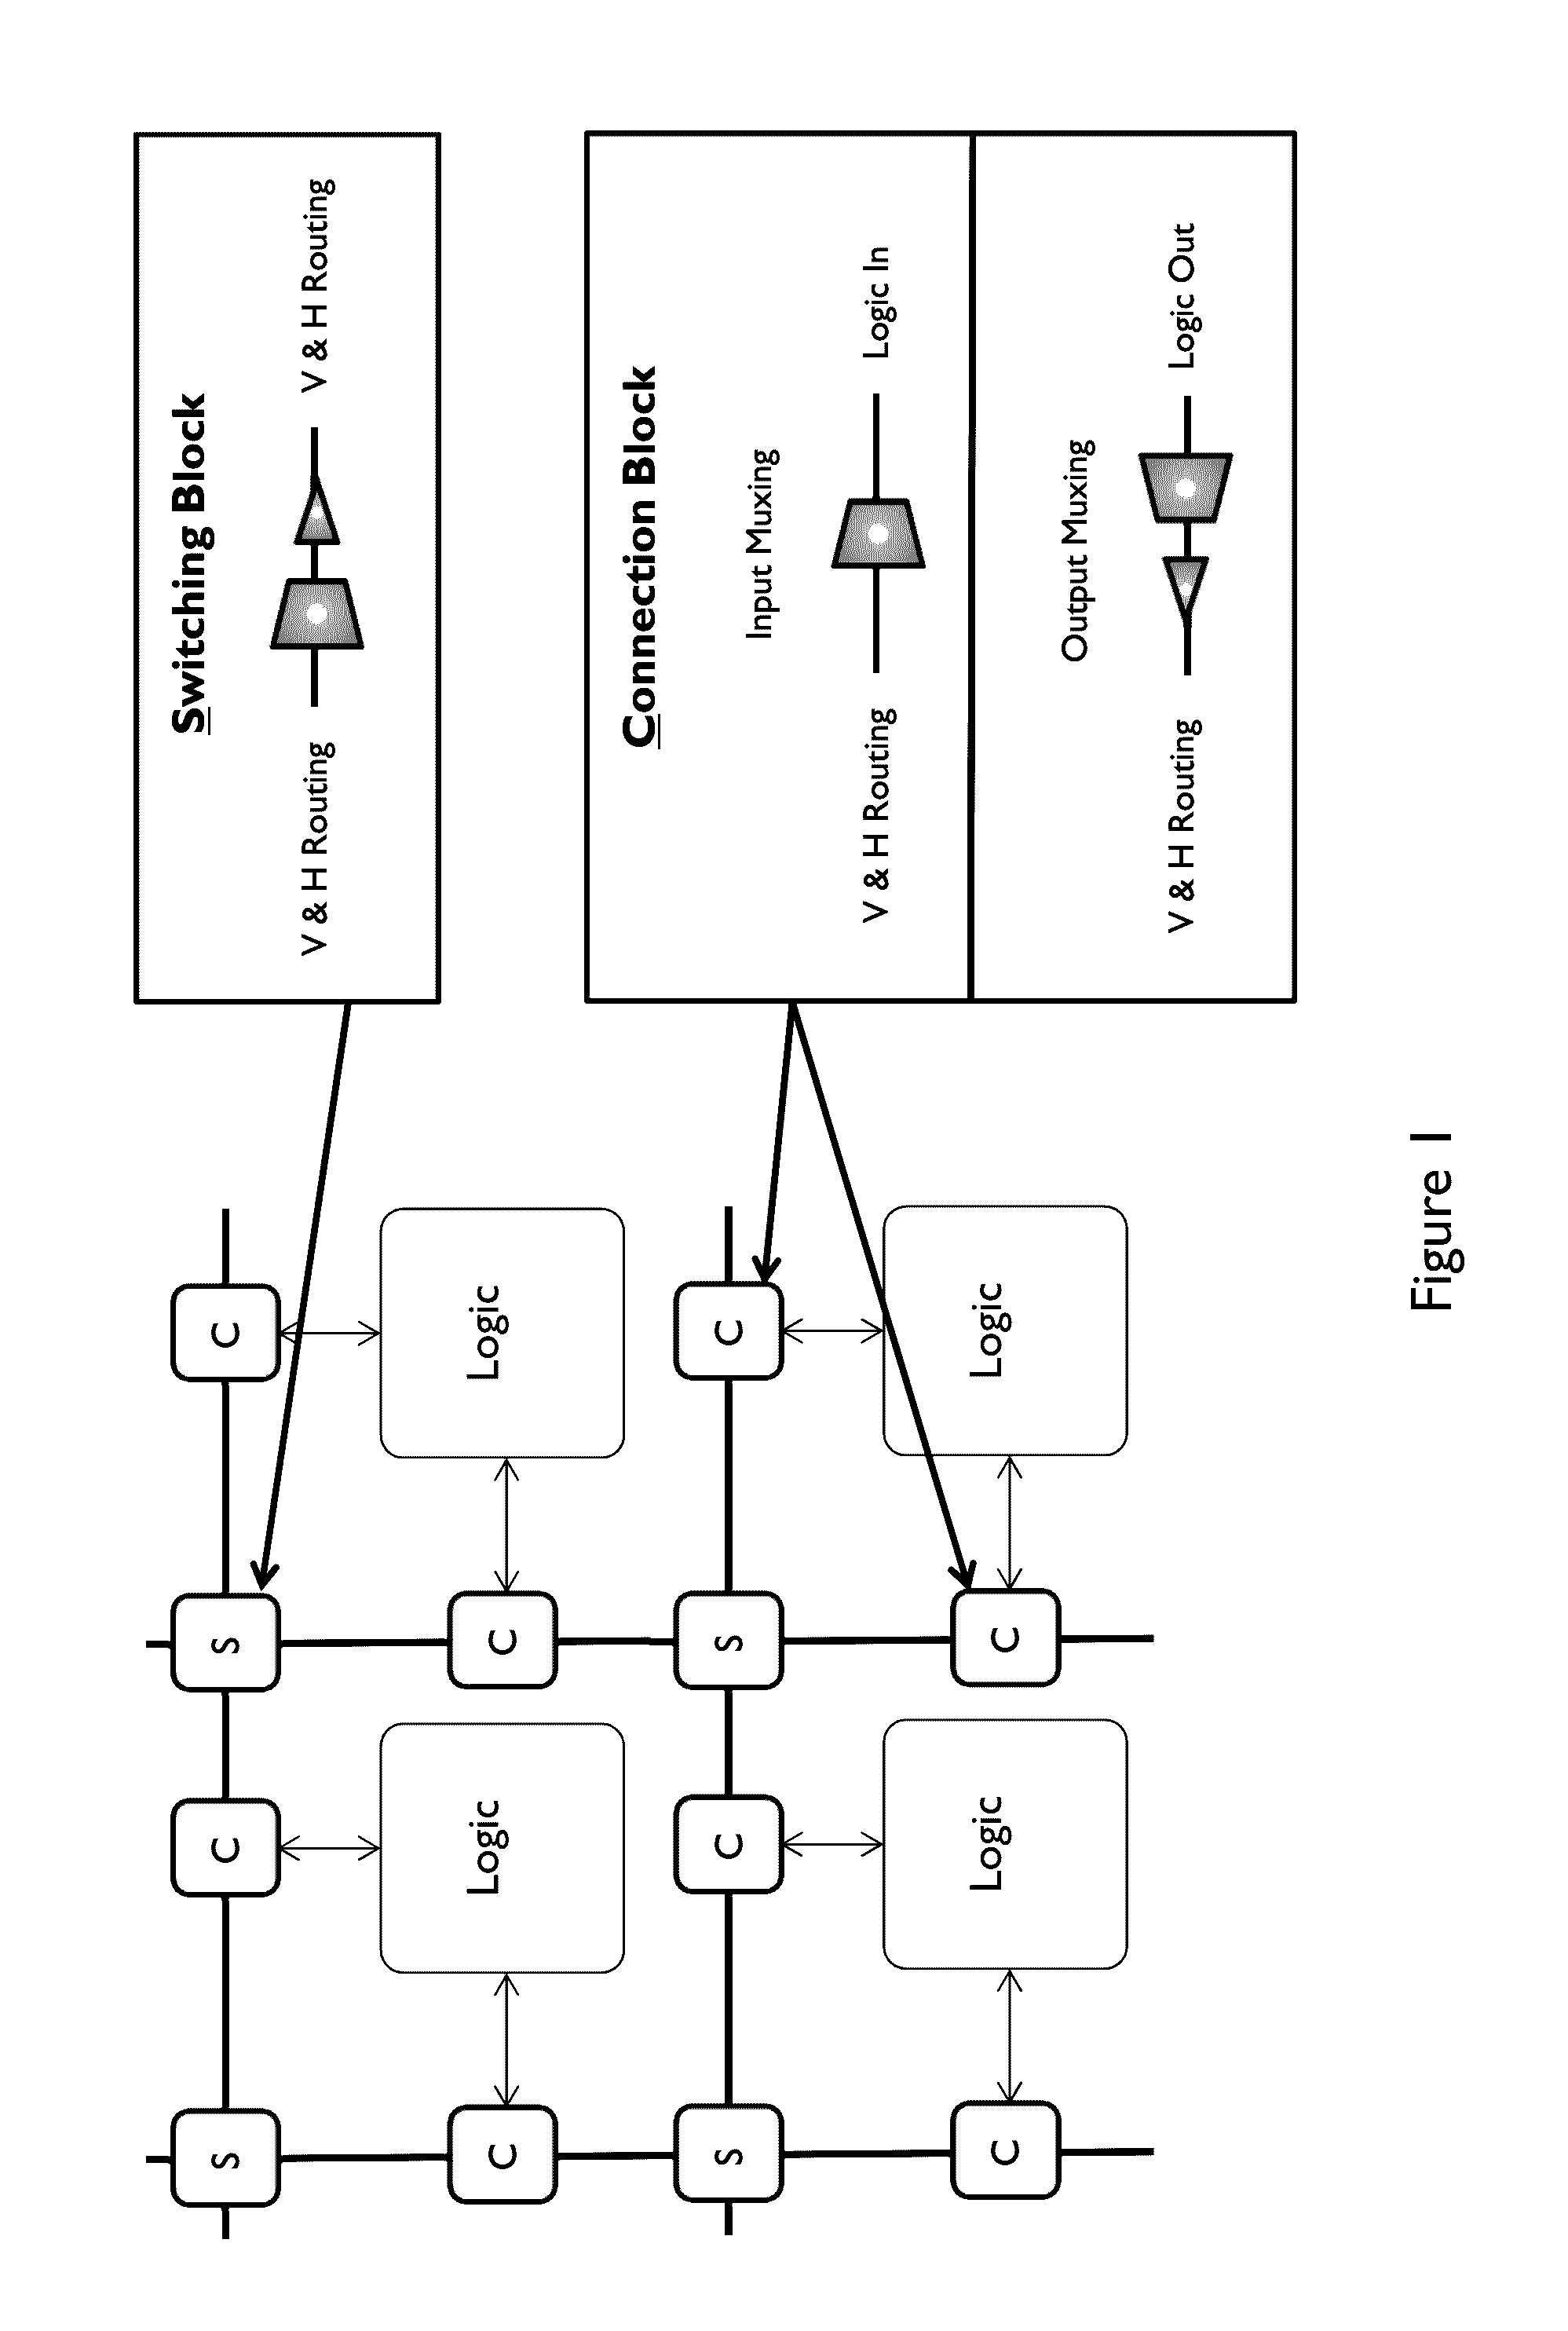 Fine grain programmable gate architecture with hybrid logic/routing element and direct-drive routing